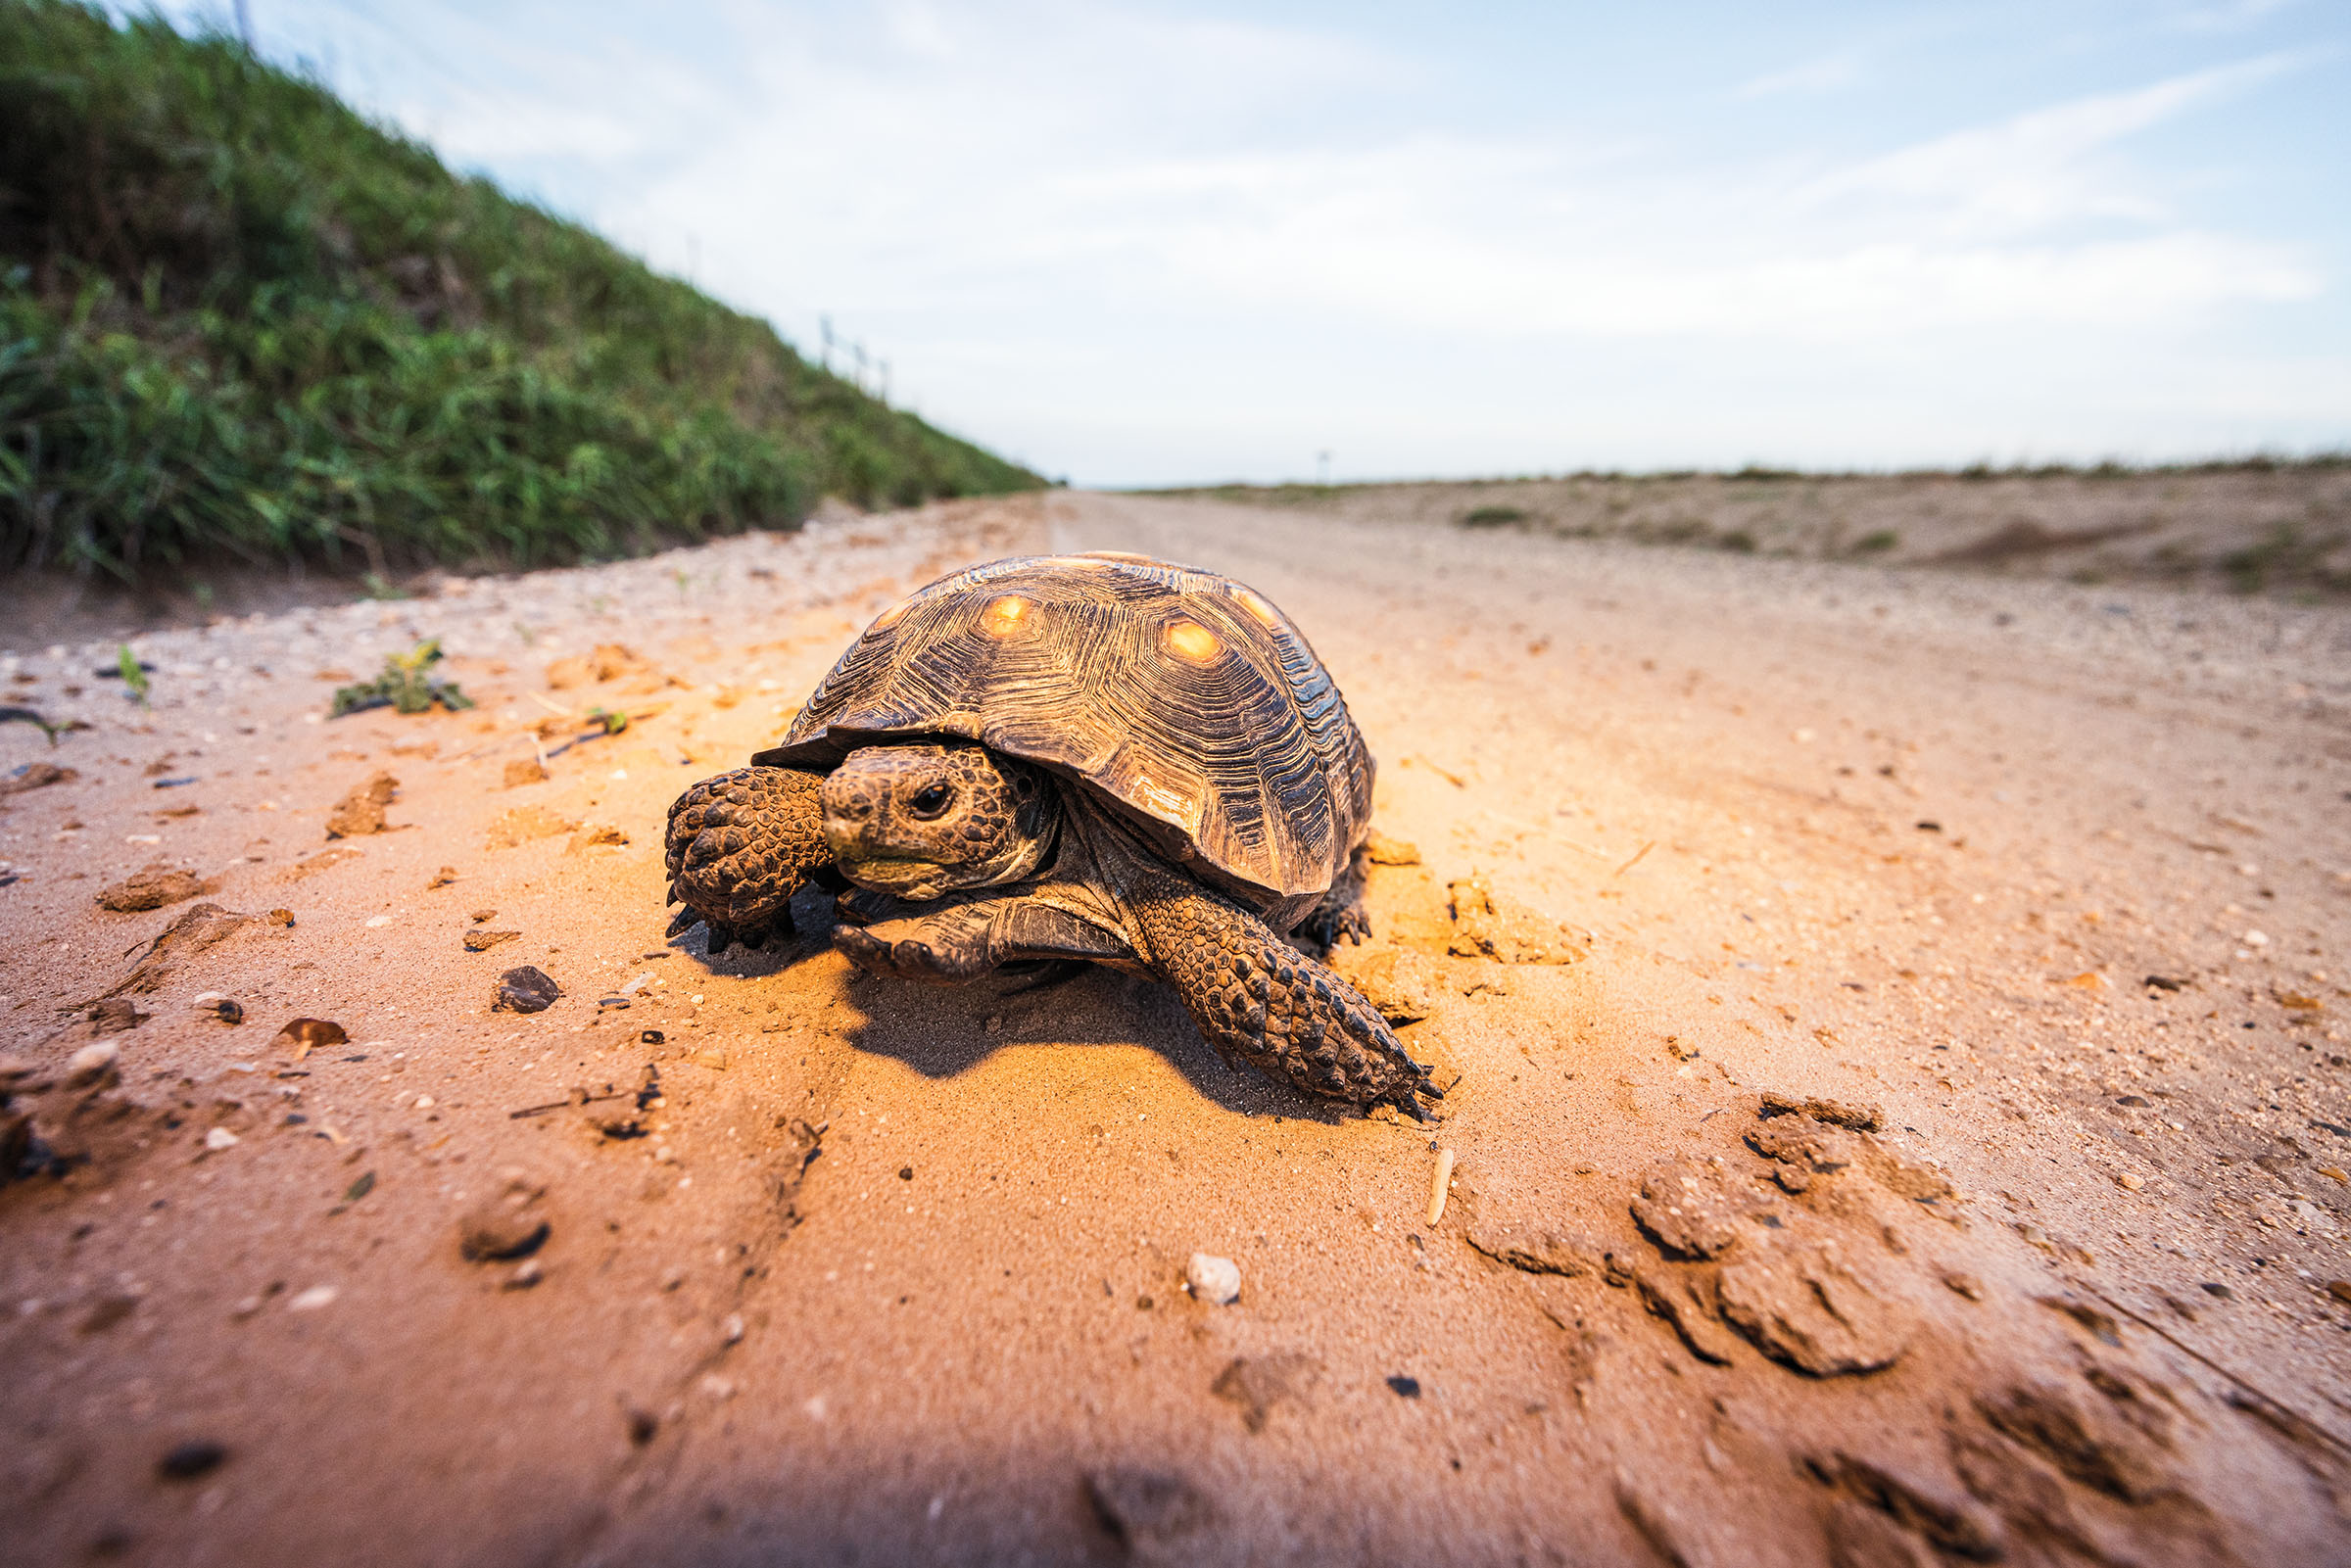 A brown tortoise moves across a dusty brown landscape